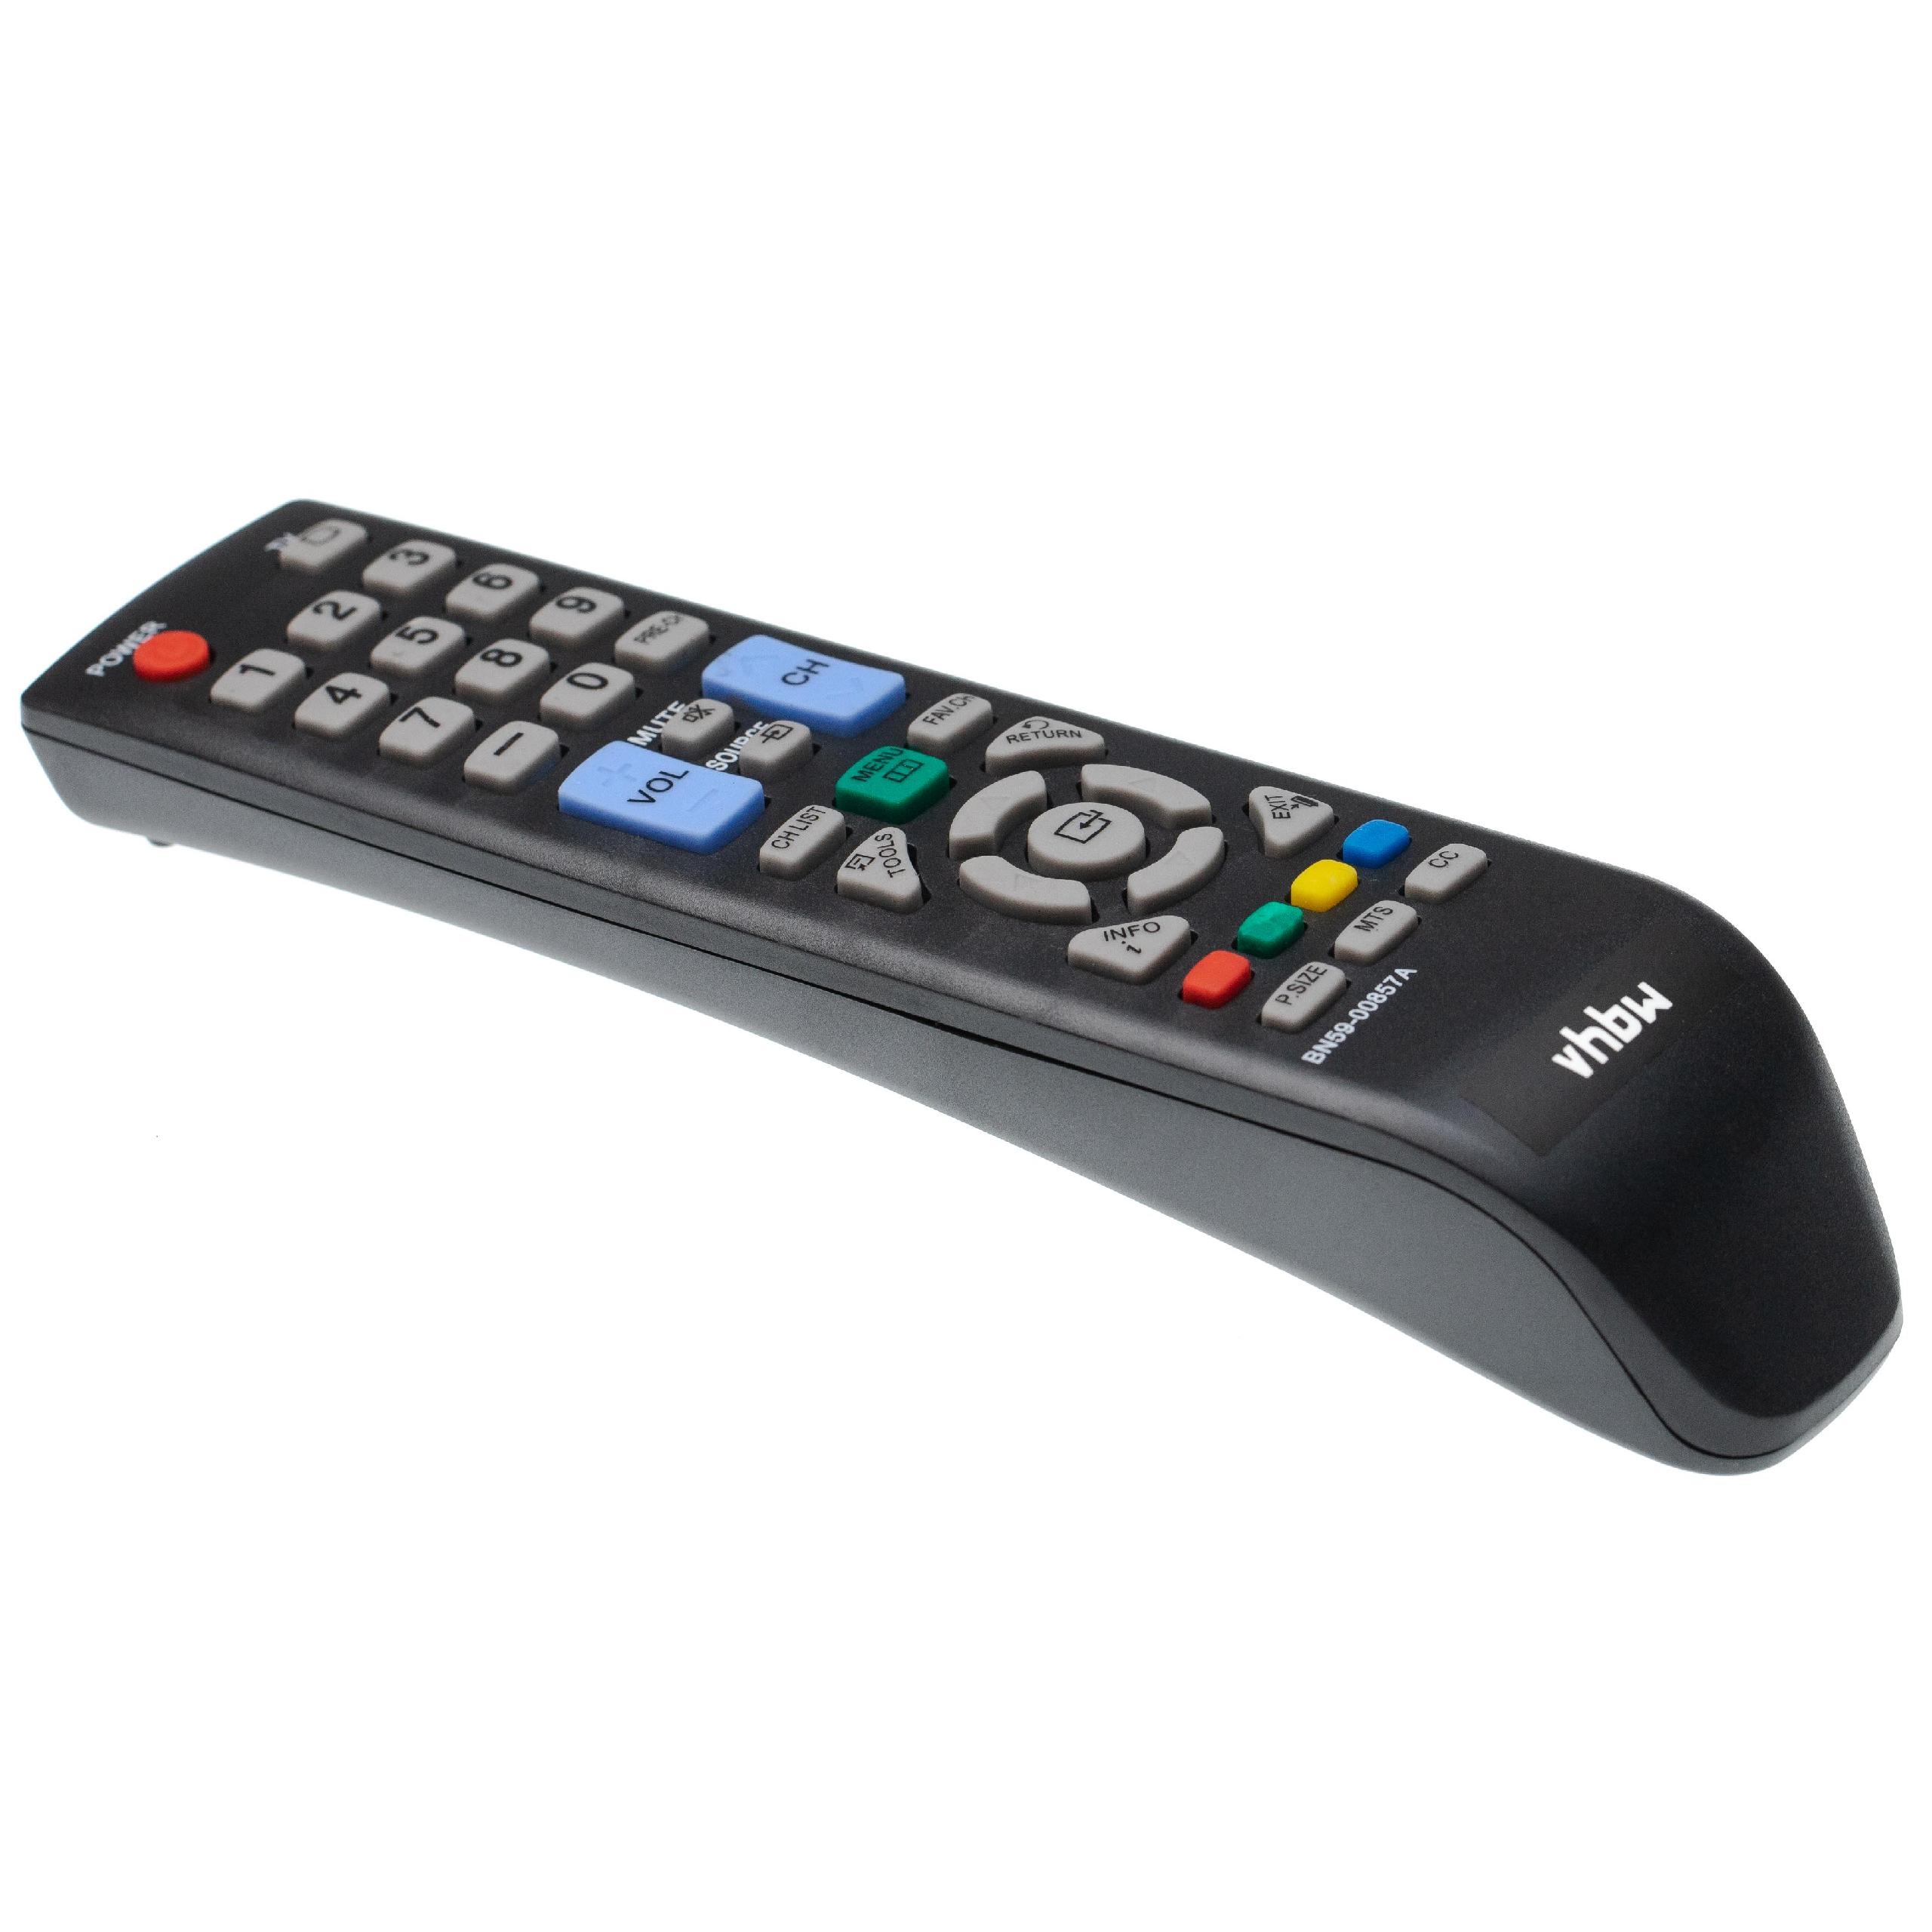 Remote Control replaces Samsung BN59-00857A for Samsung TV